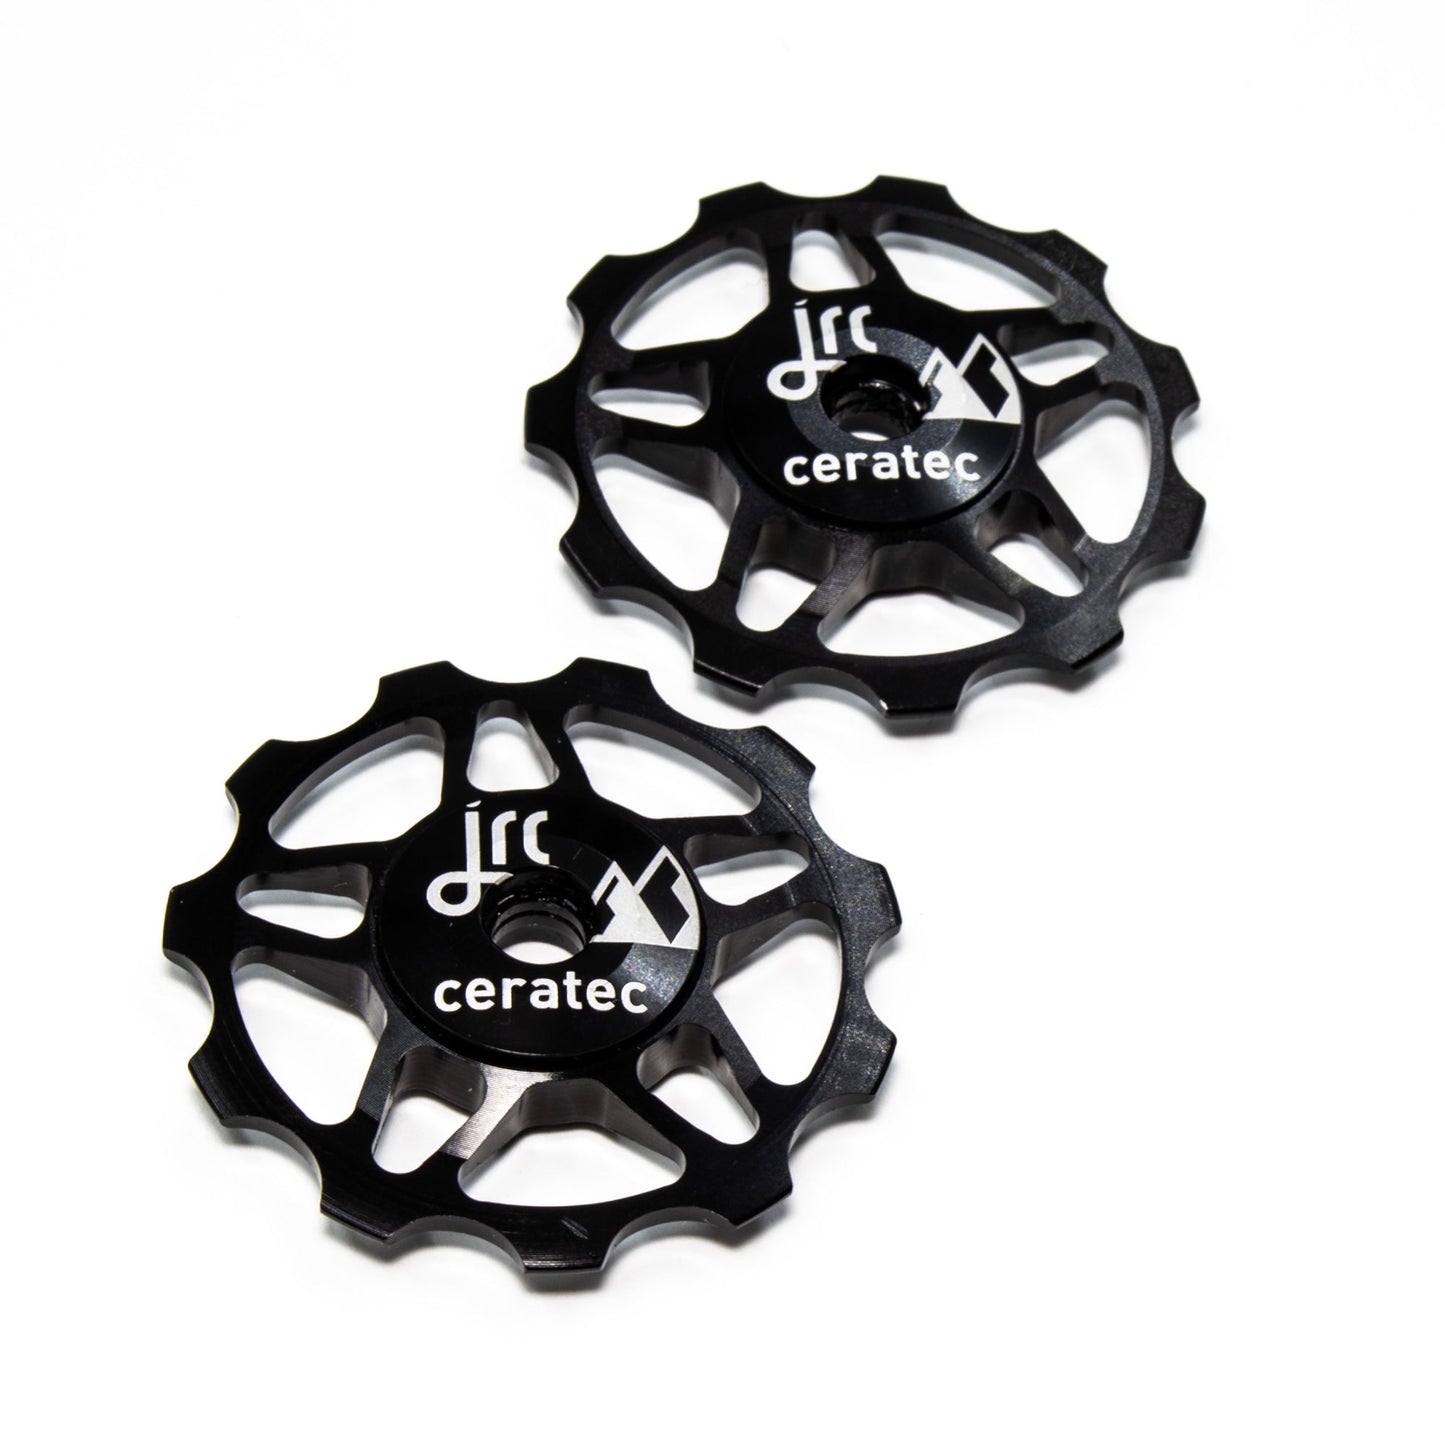 Black, lightweight aluminium 11 tooth pulley wheel set for bicycles, for Shimano SRAM and Campagnolo